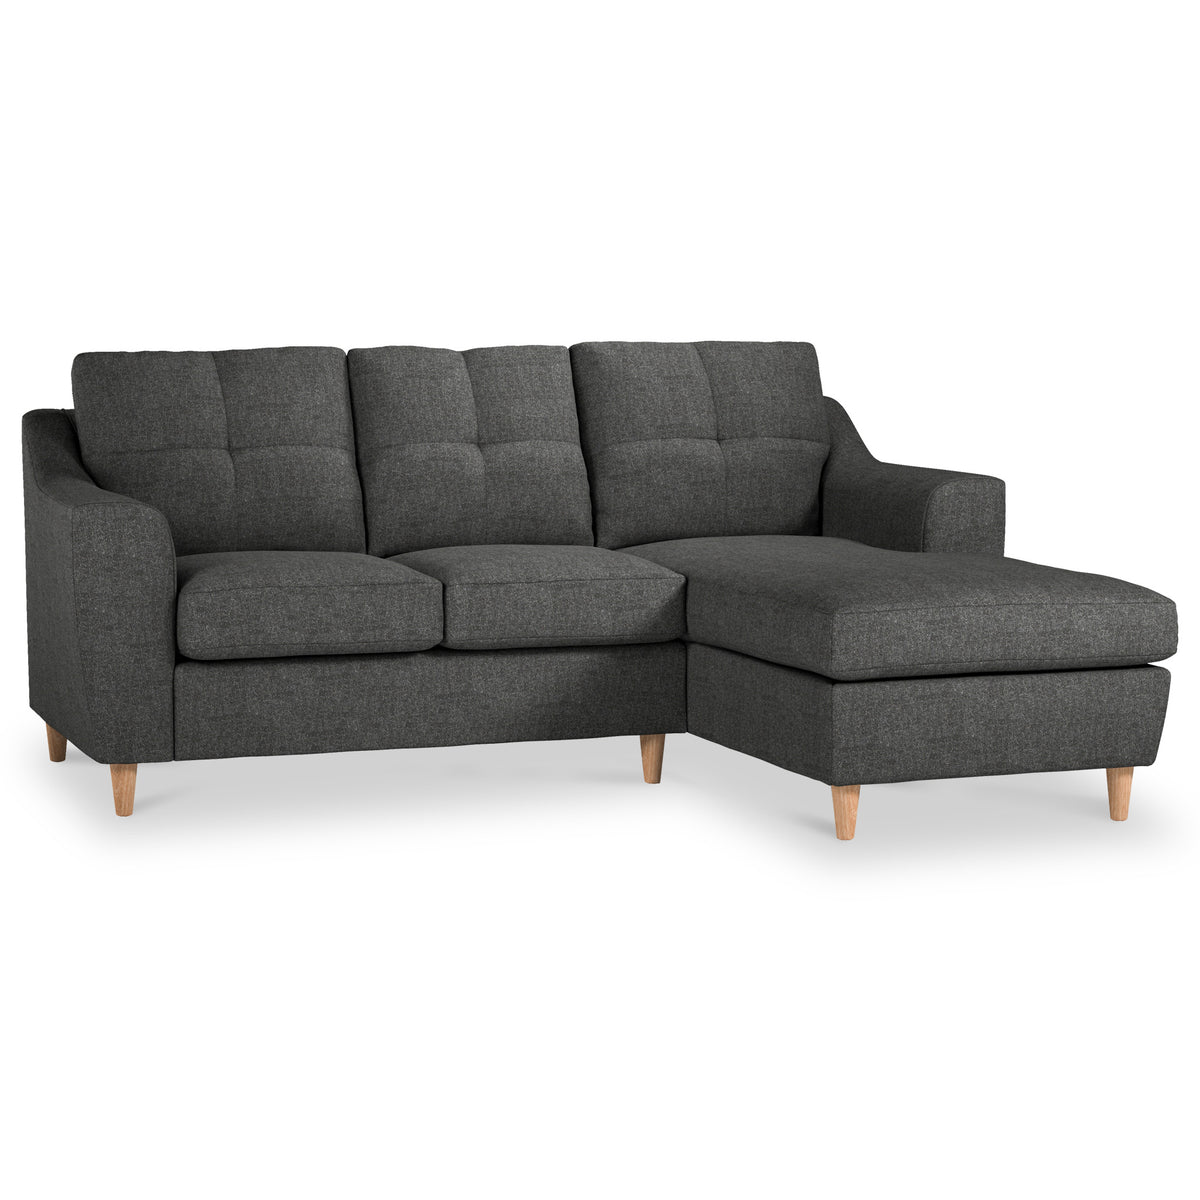 Justin Charcoal right Hand Chaise Sofa from Roseland Furniture